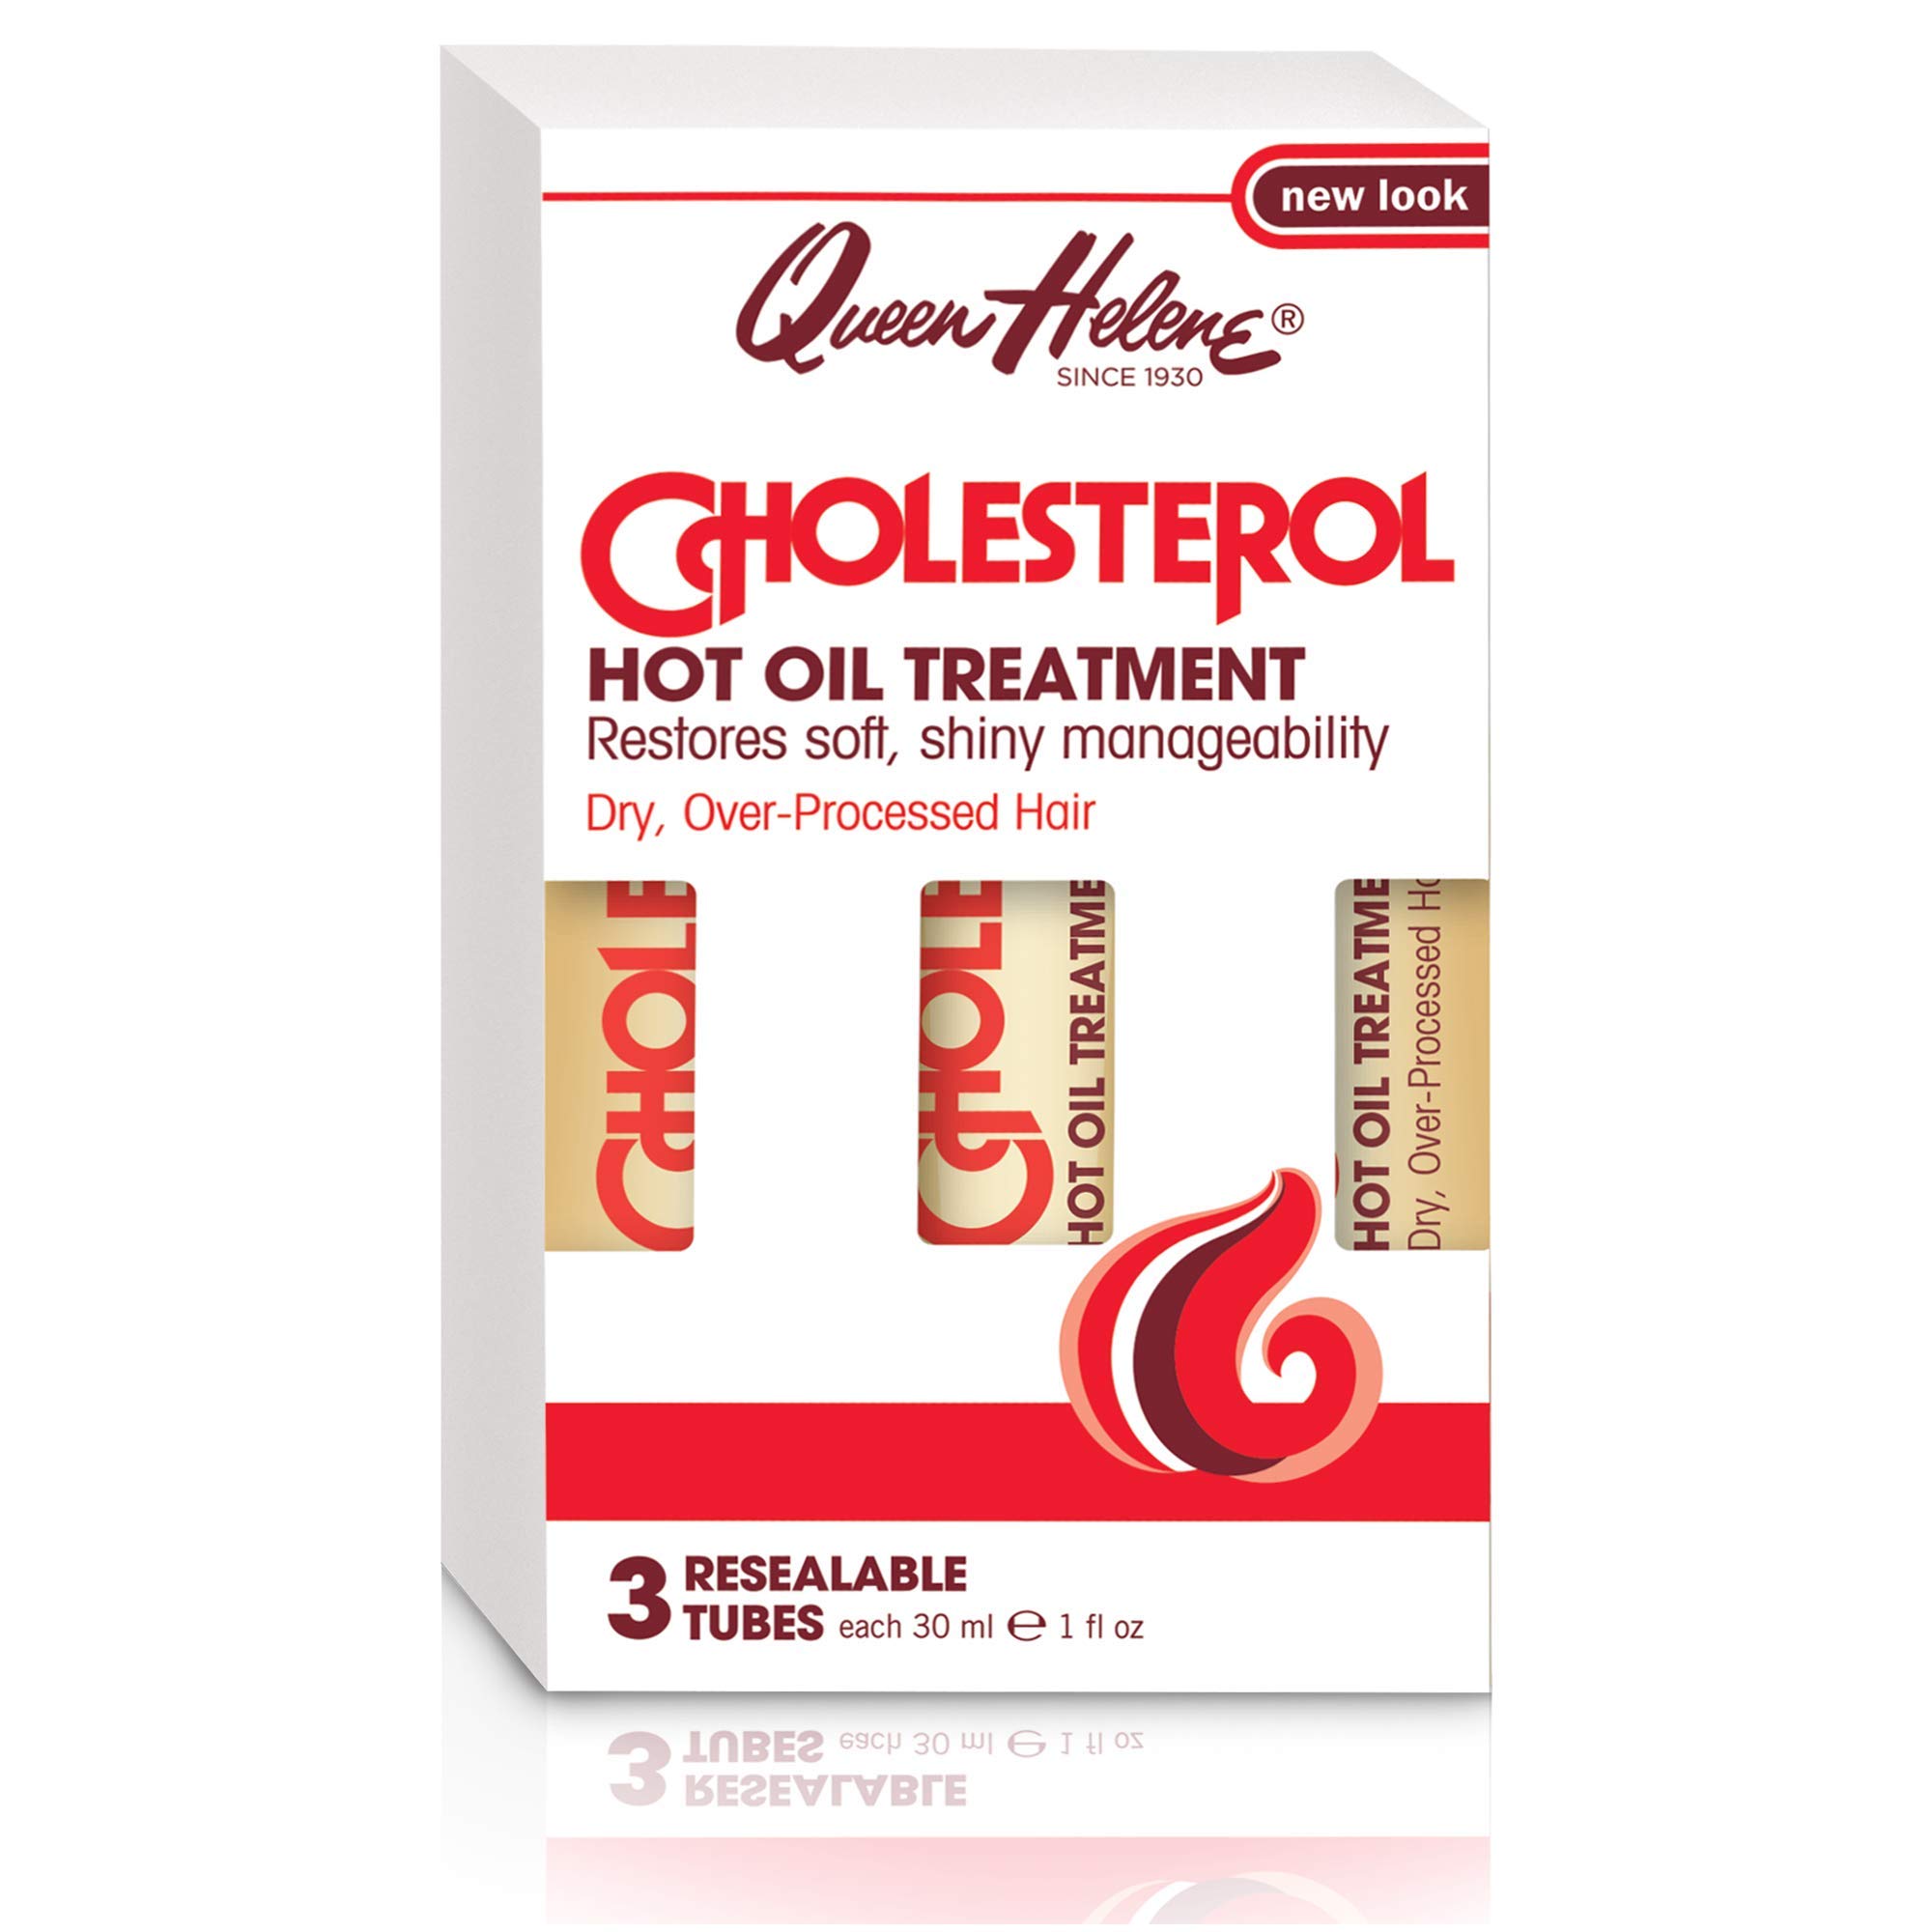 Queen Helene Cholesterol Hot Oil Treatment, 1 Oz, 3 Count (Pack of 6) (Packaging May Vary)